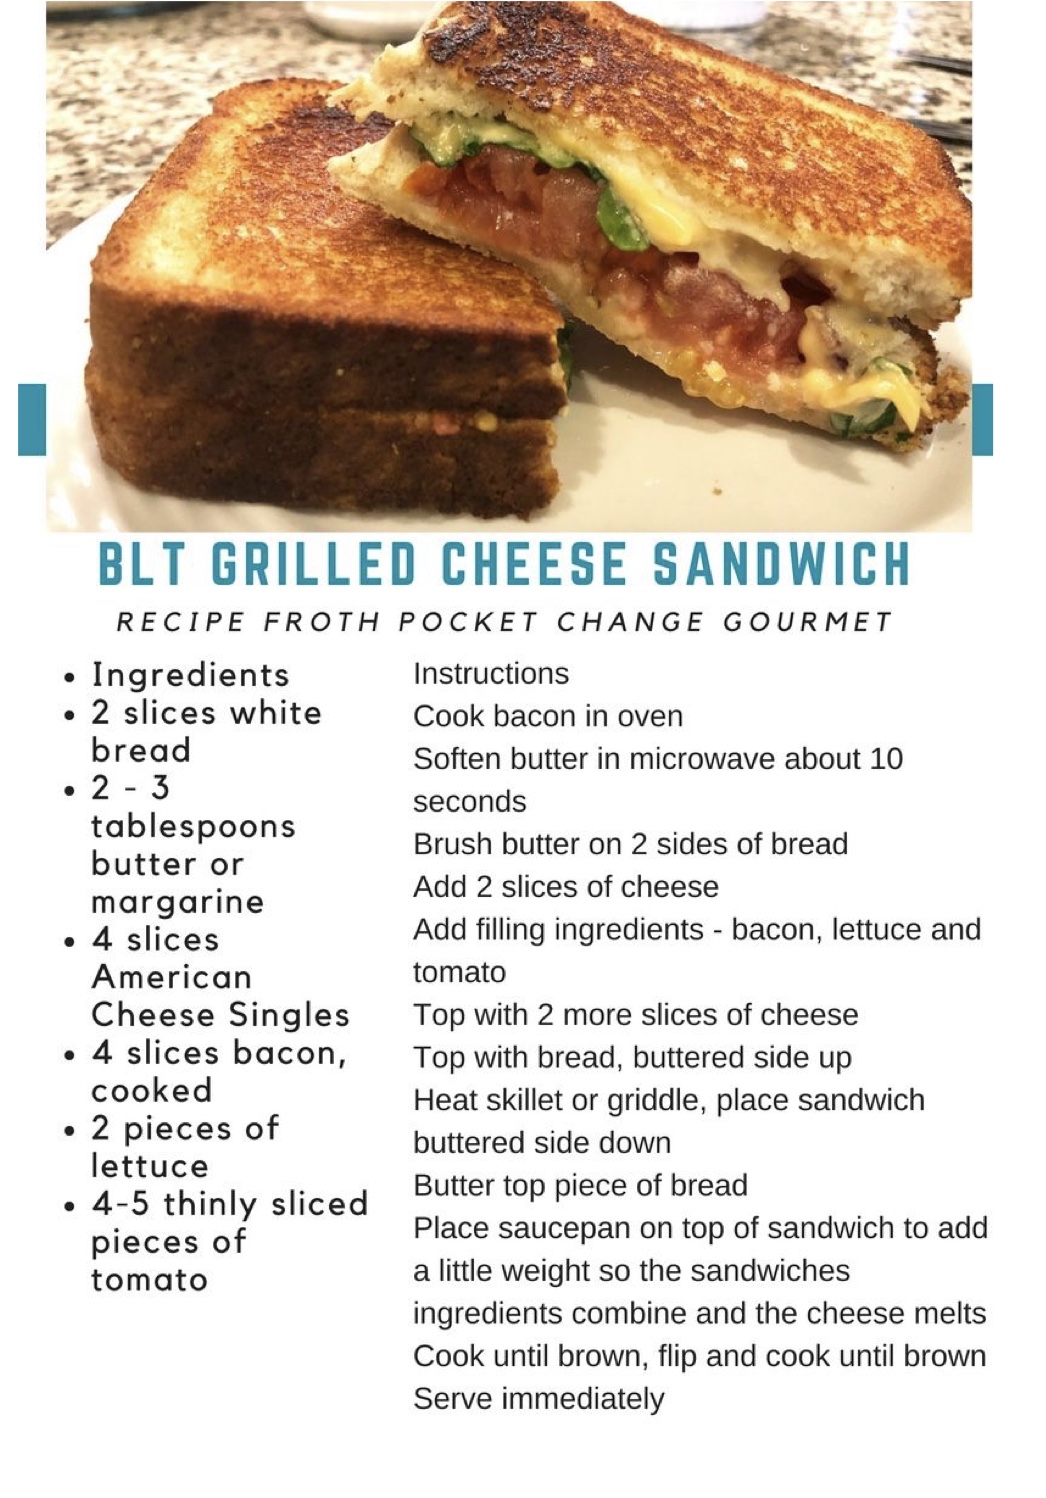 Recipe Review BLT Grilled Cheese Sandwich from The Pocket Change Gourmet